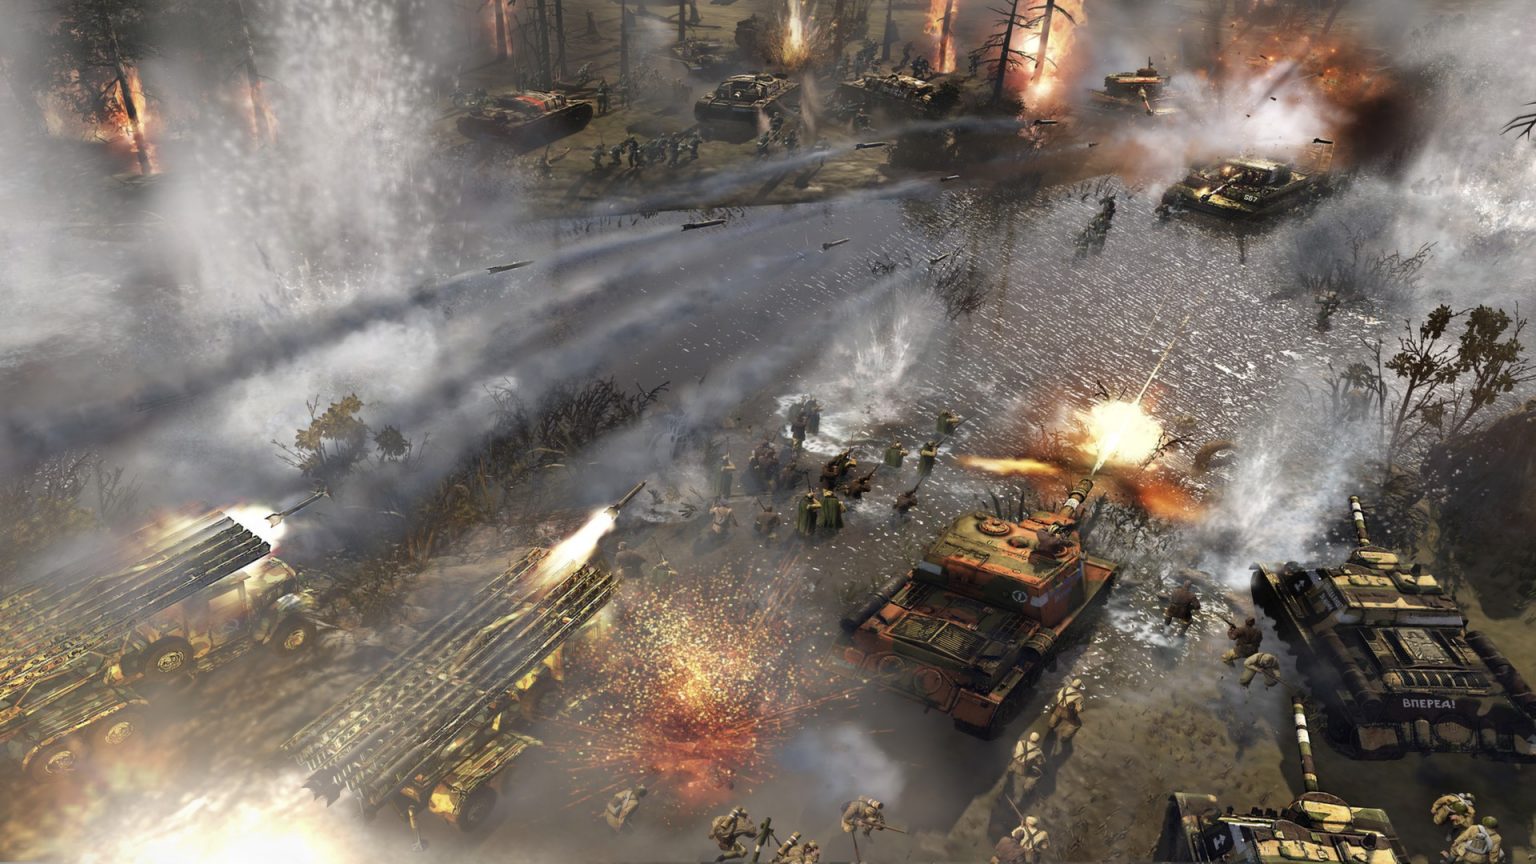 company of heroes 3 free download